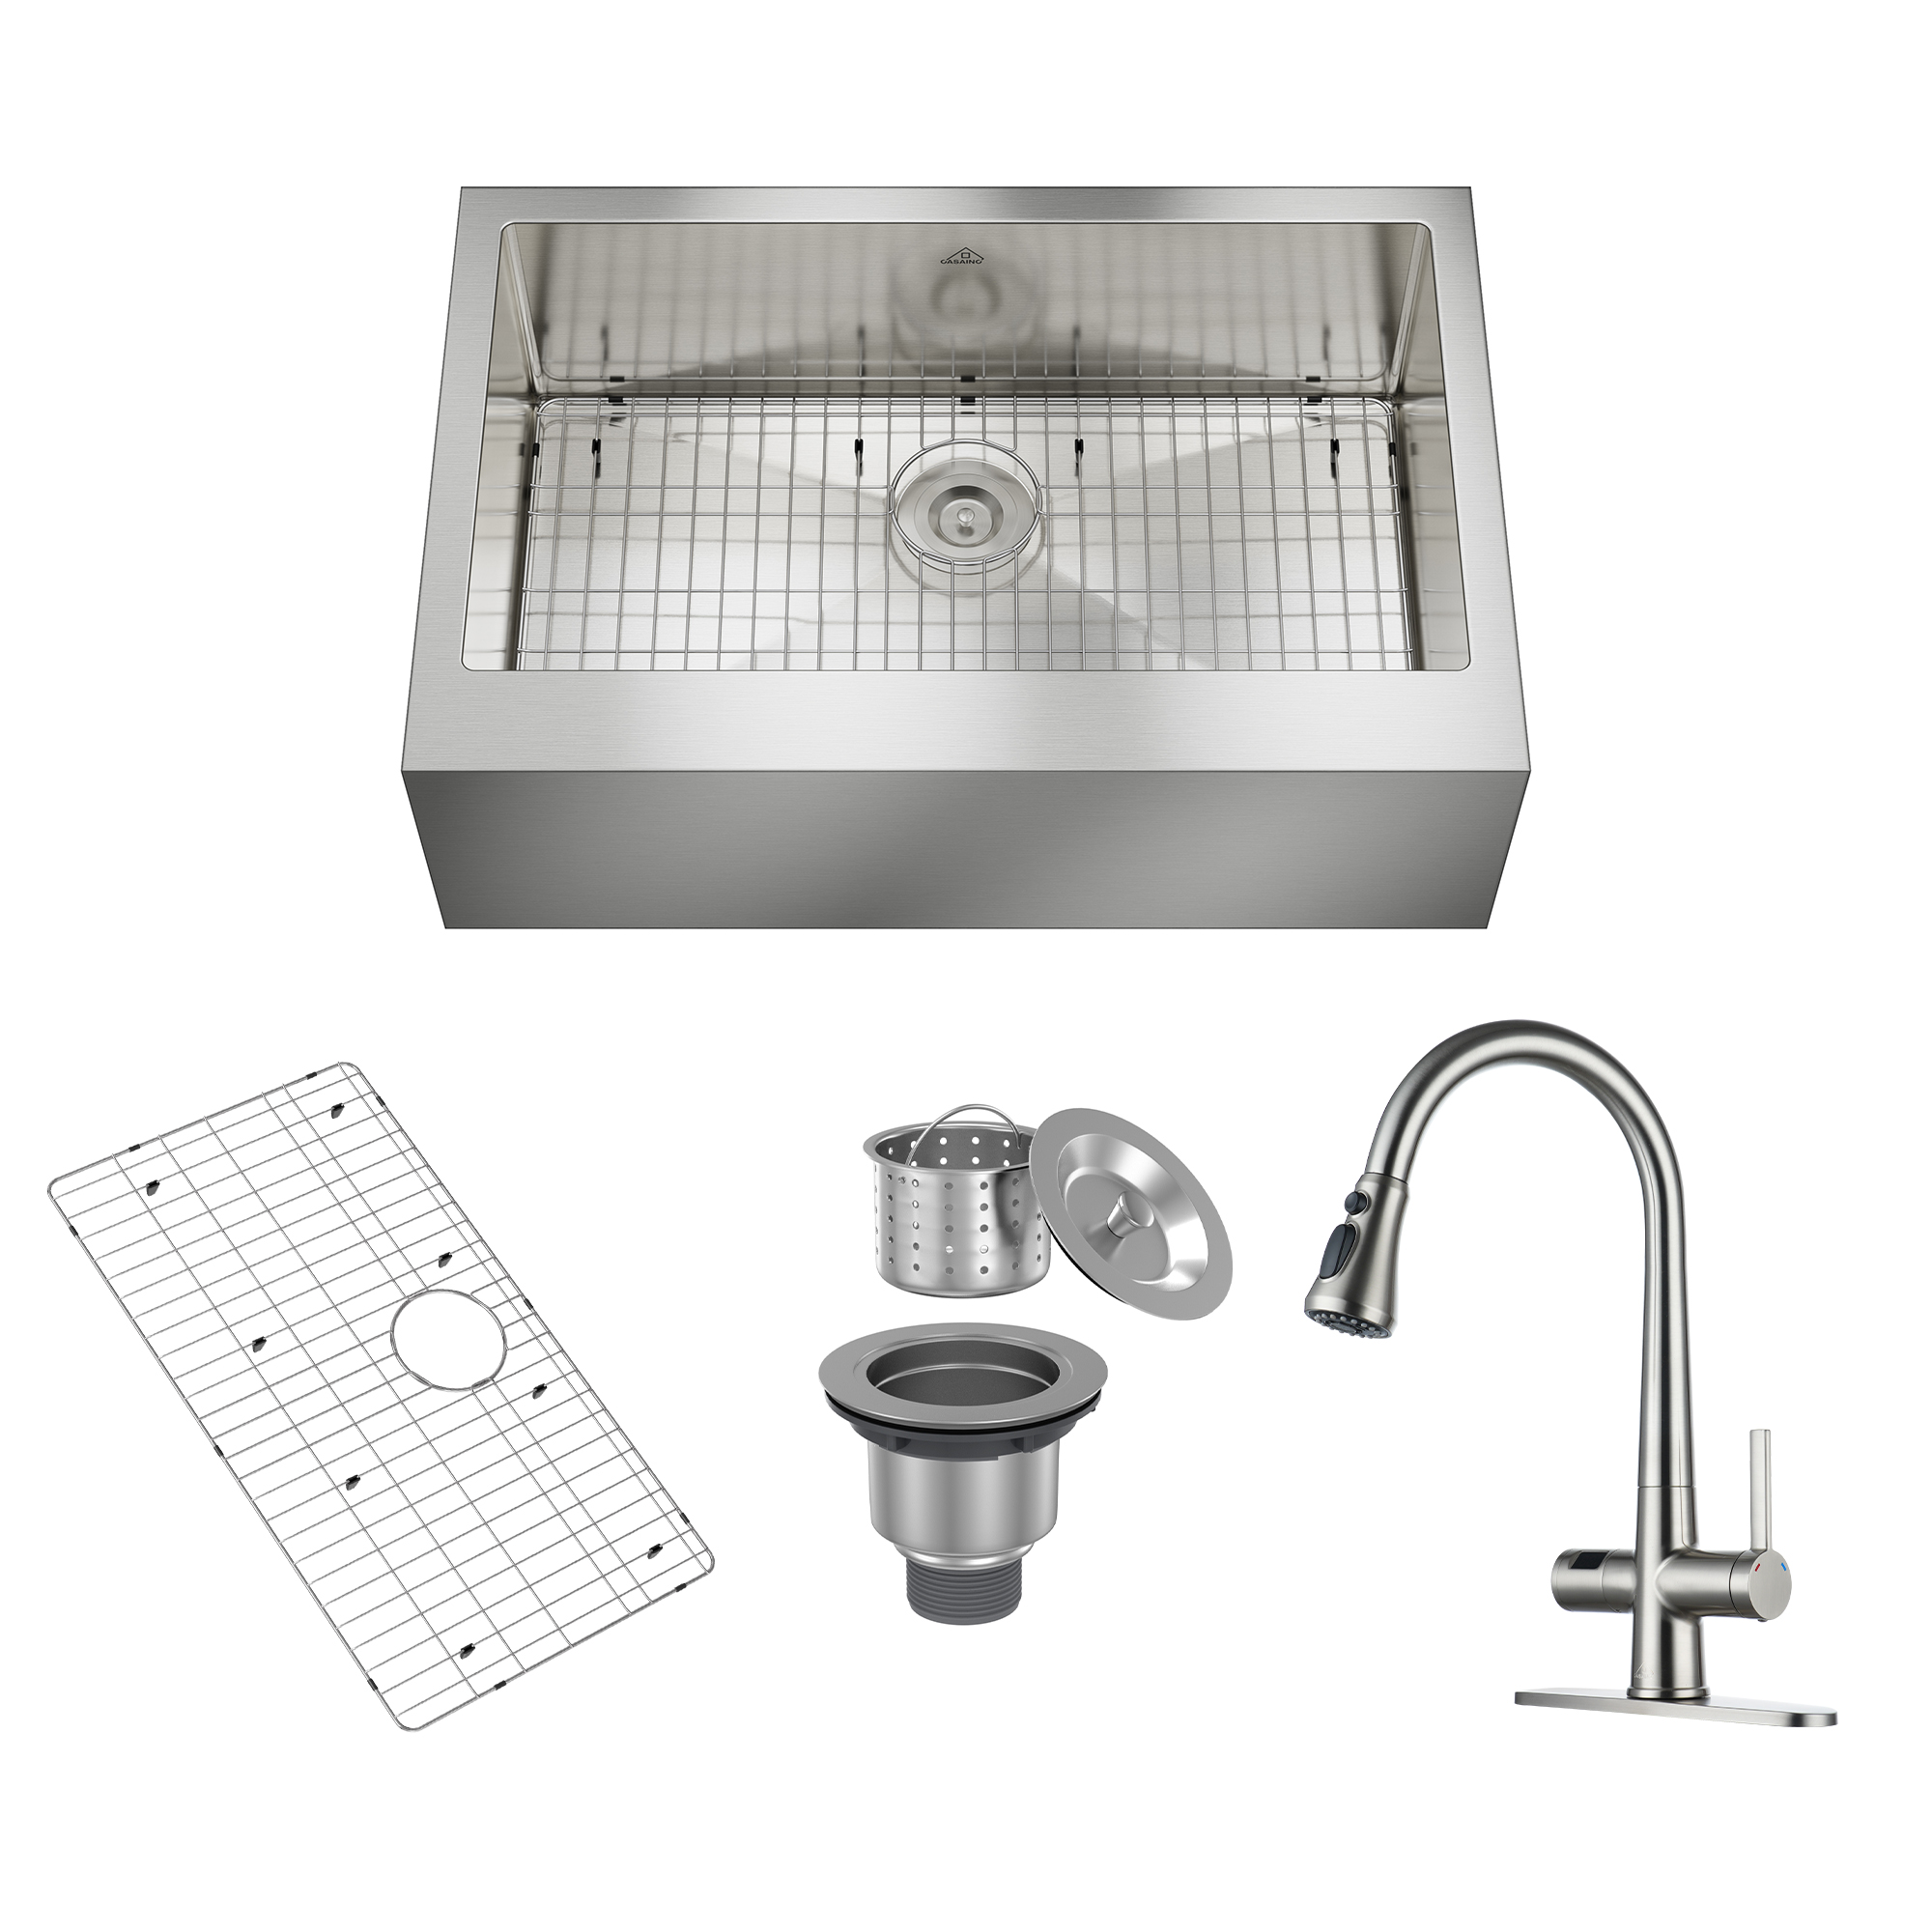 33" Premium All-in-One Deep Basin 304 Stainless Steel Kitchen Sink & Single-Handle Pull-Out Sprayer Kitchen Faucet with Digital Display